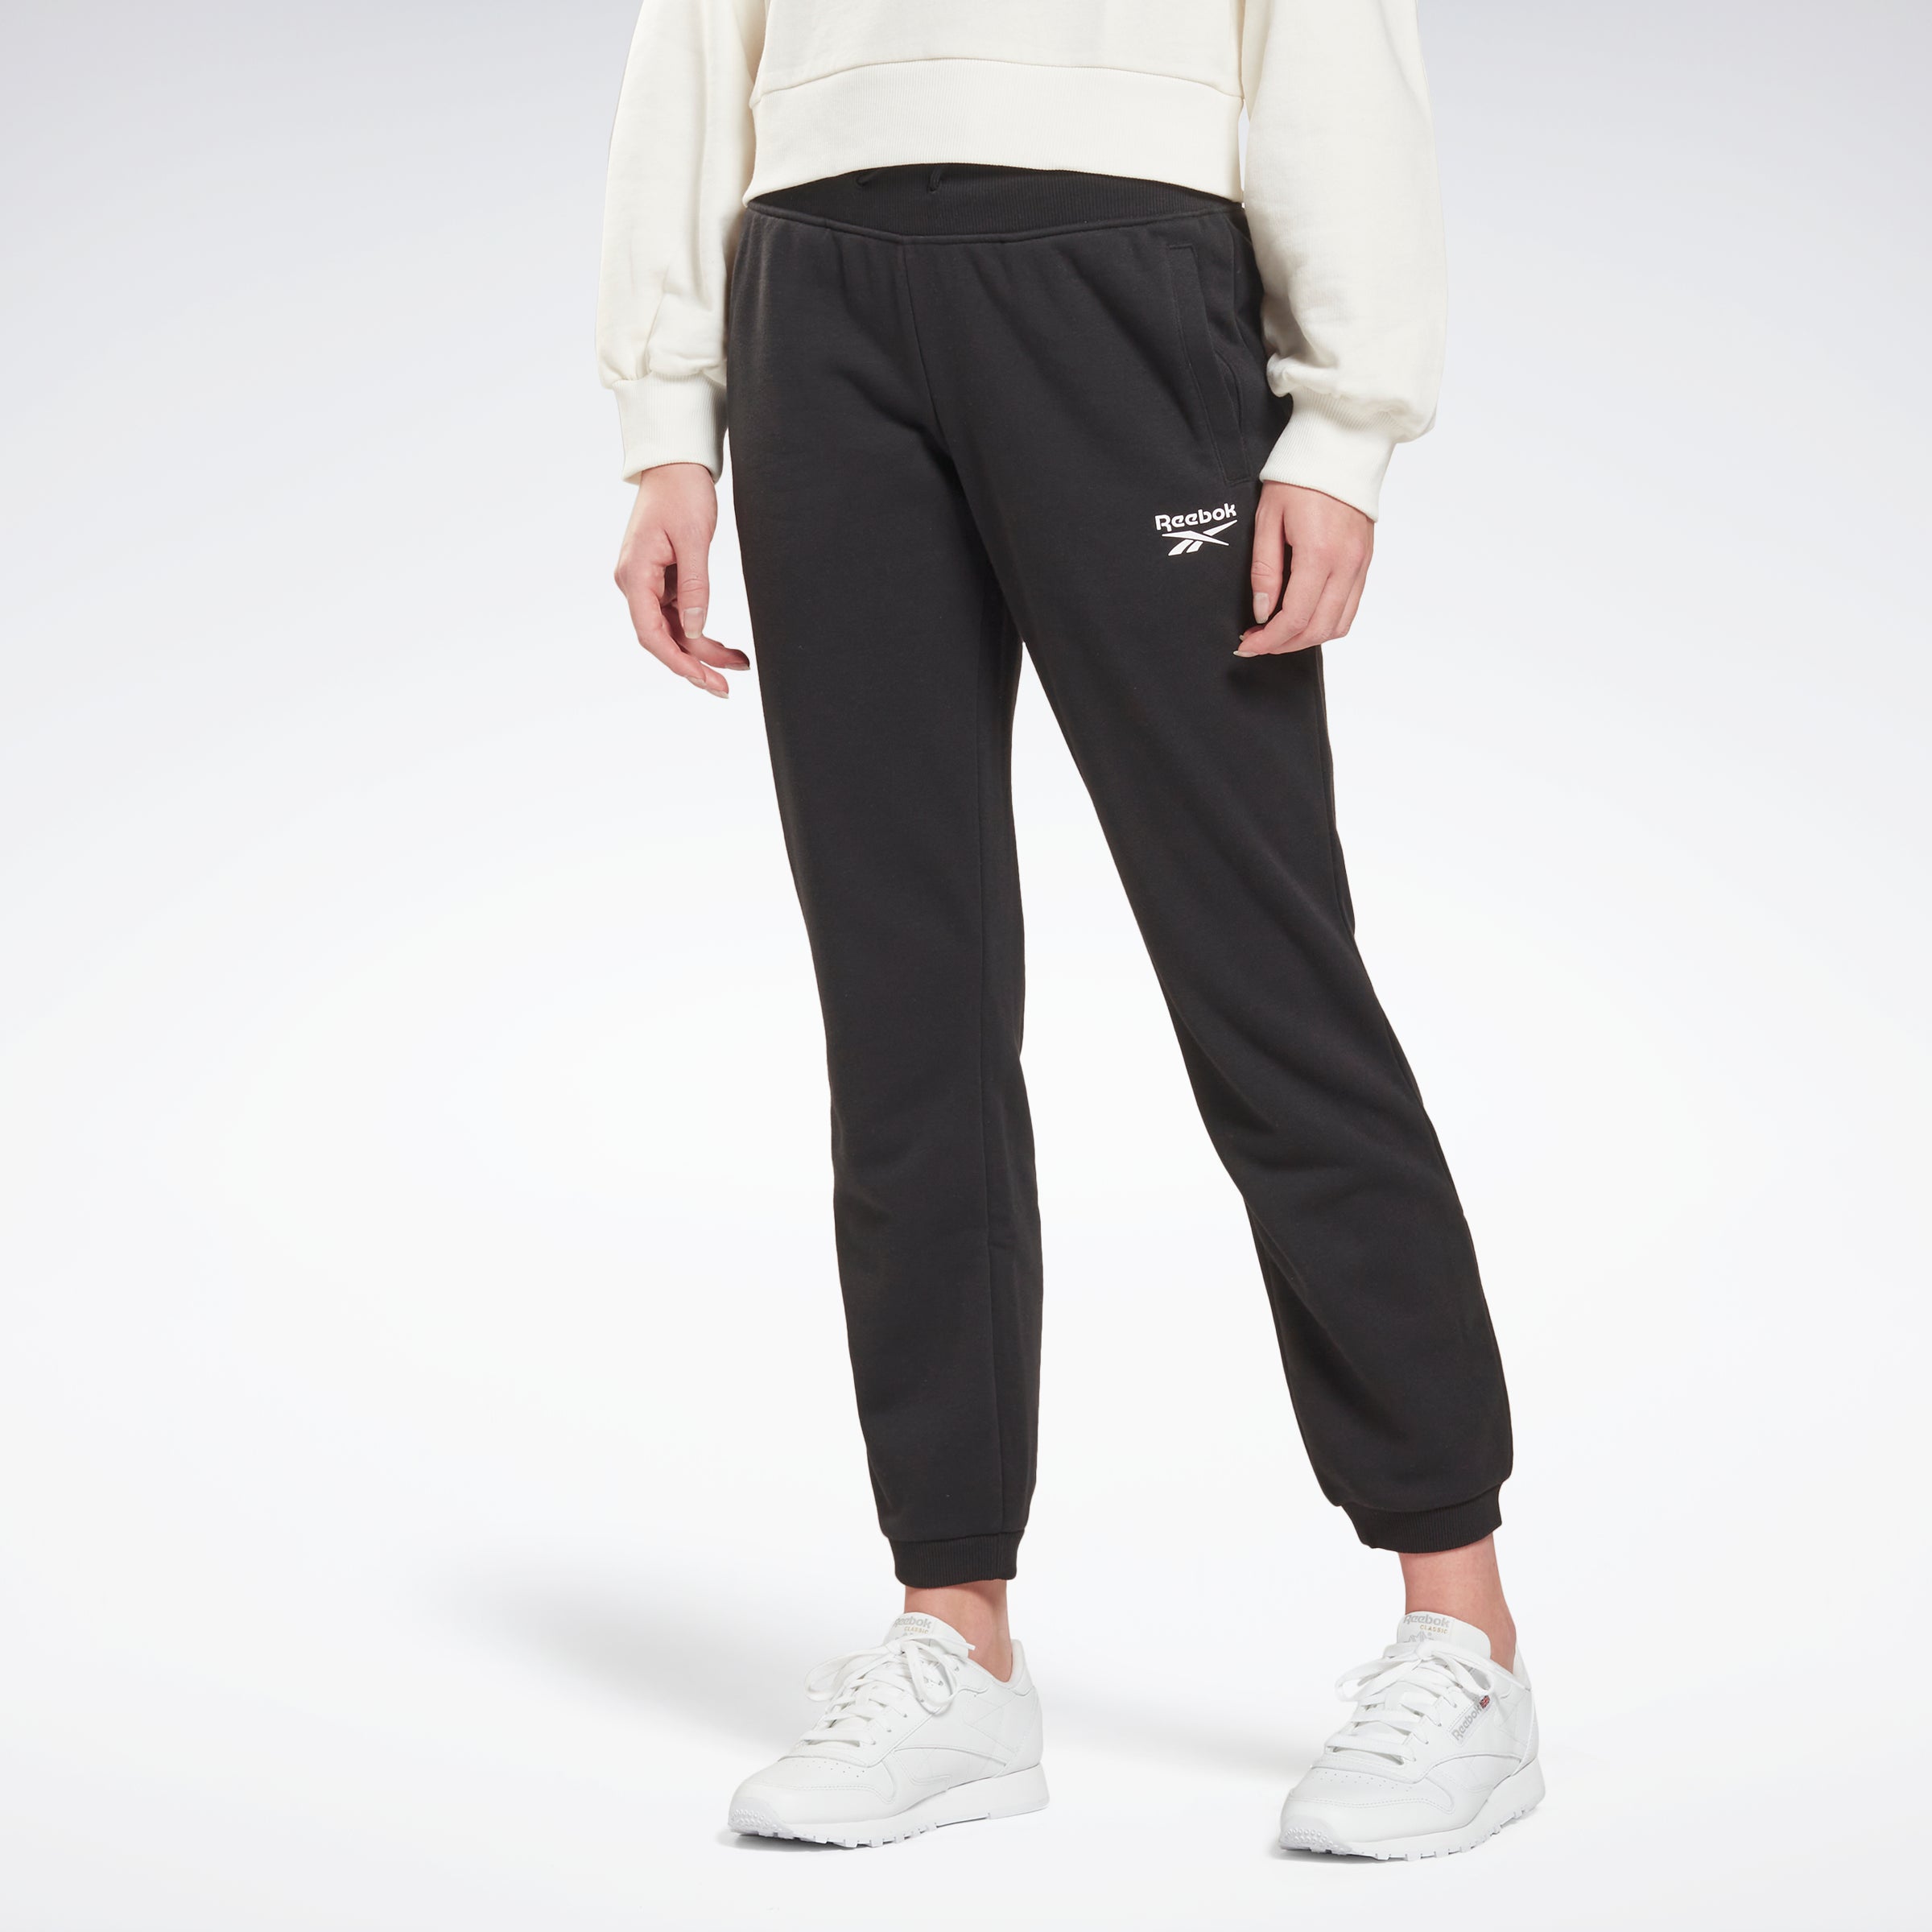 Reebok MYT sweatpants pants with contrast pull detail in black